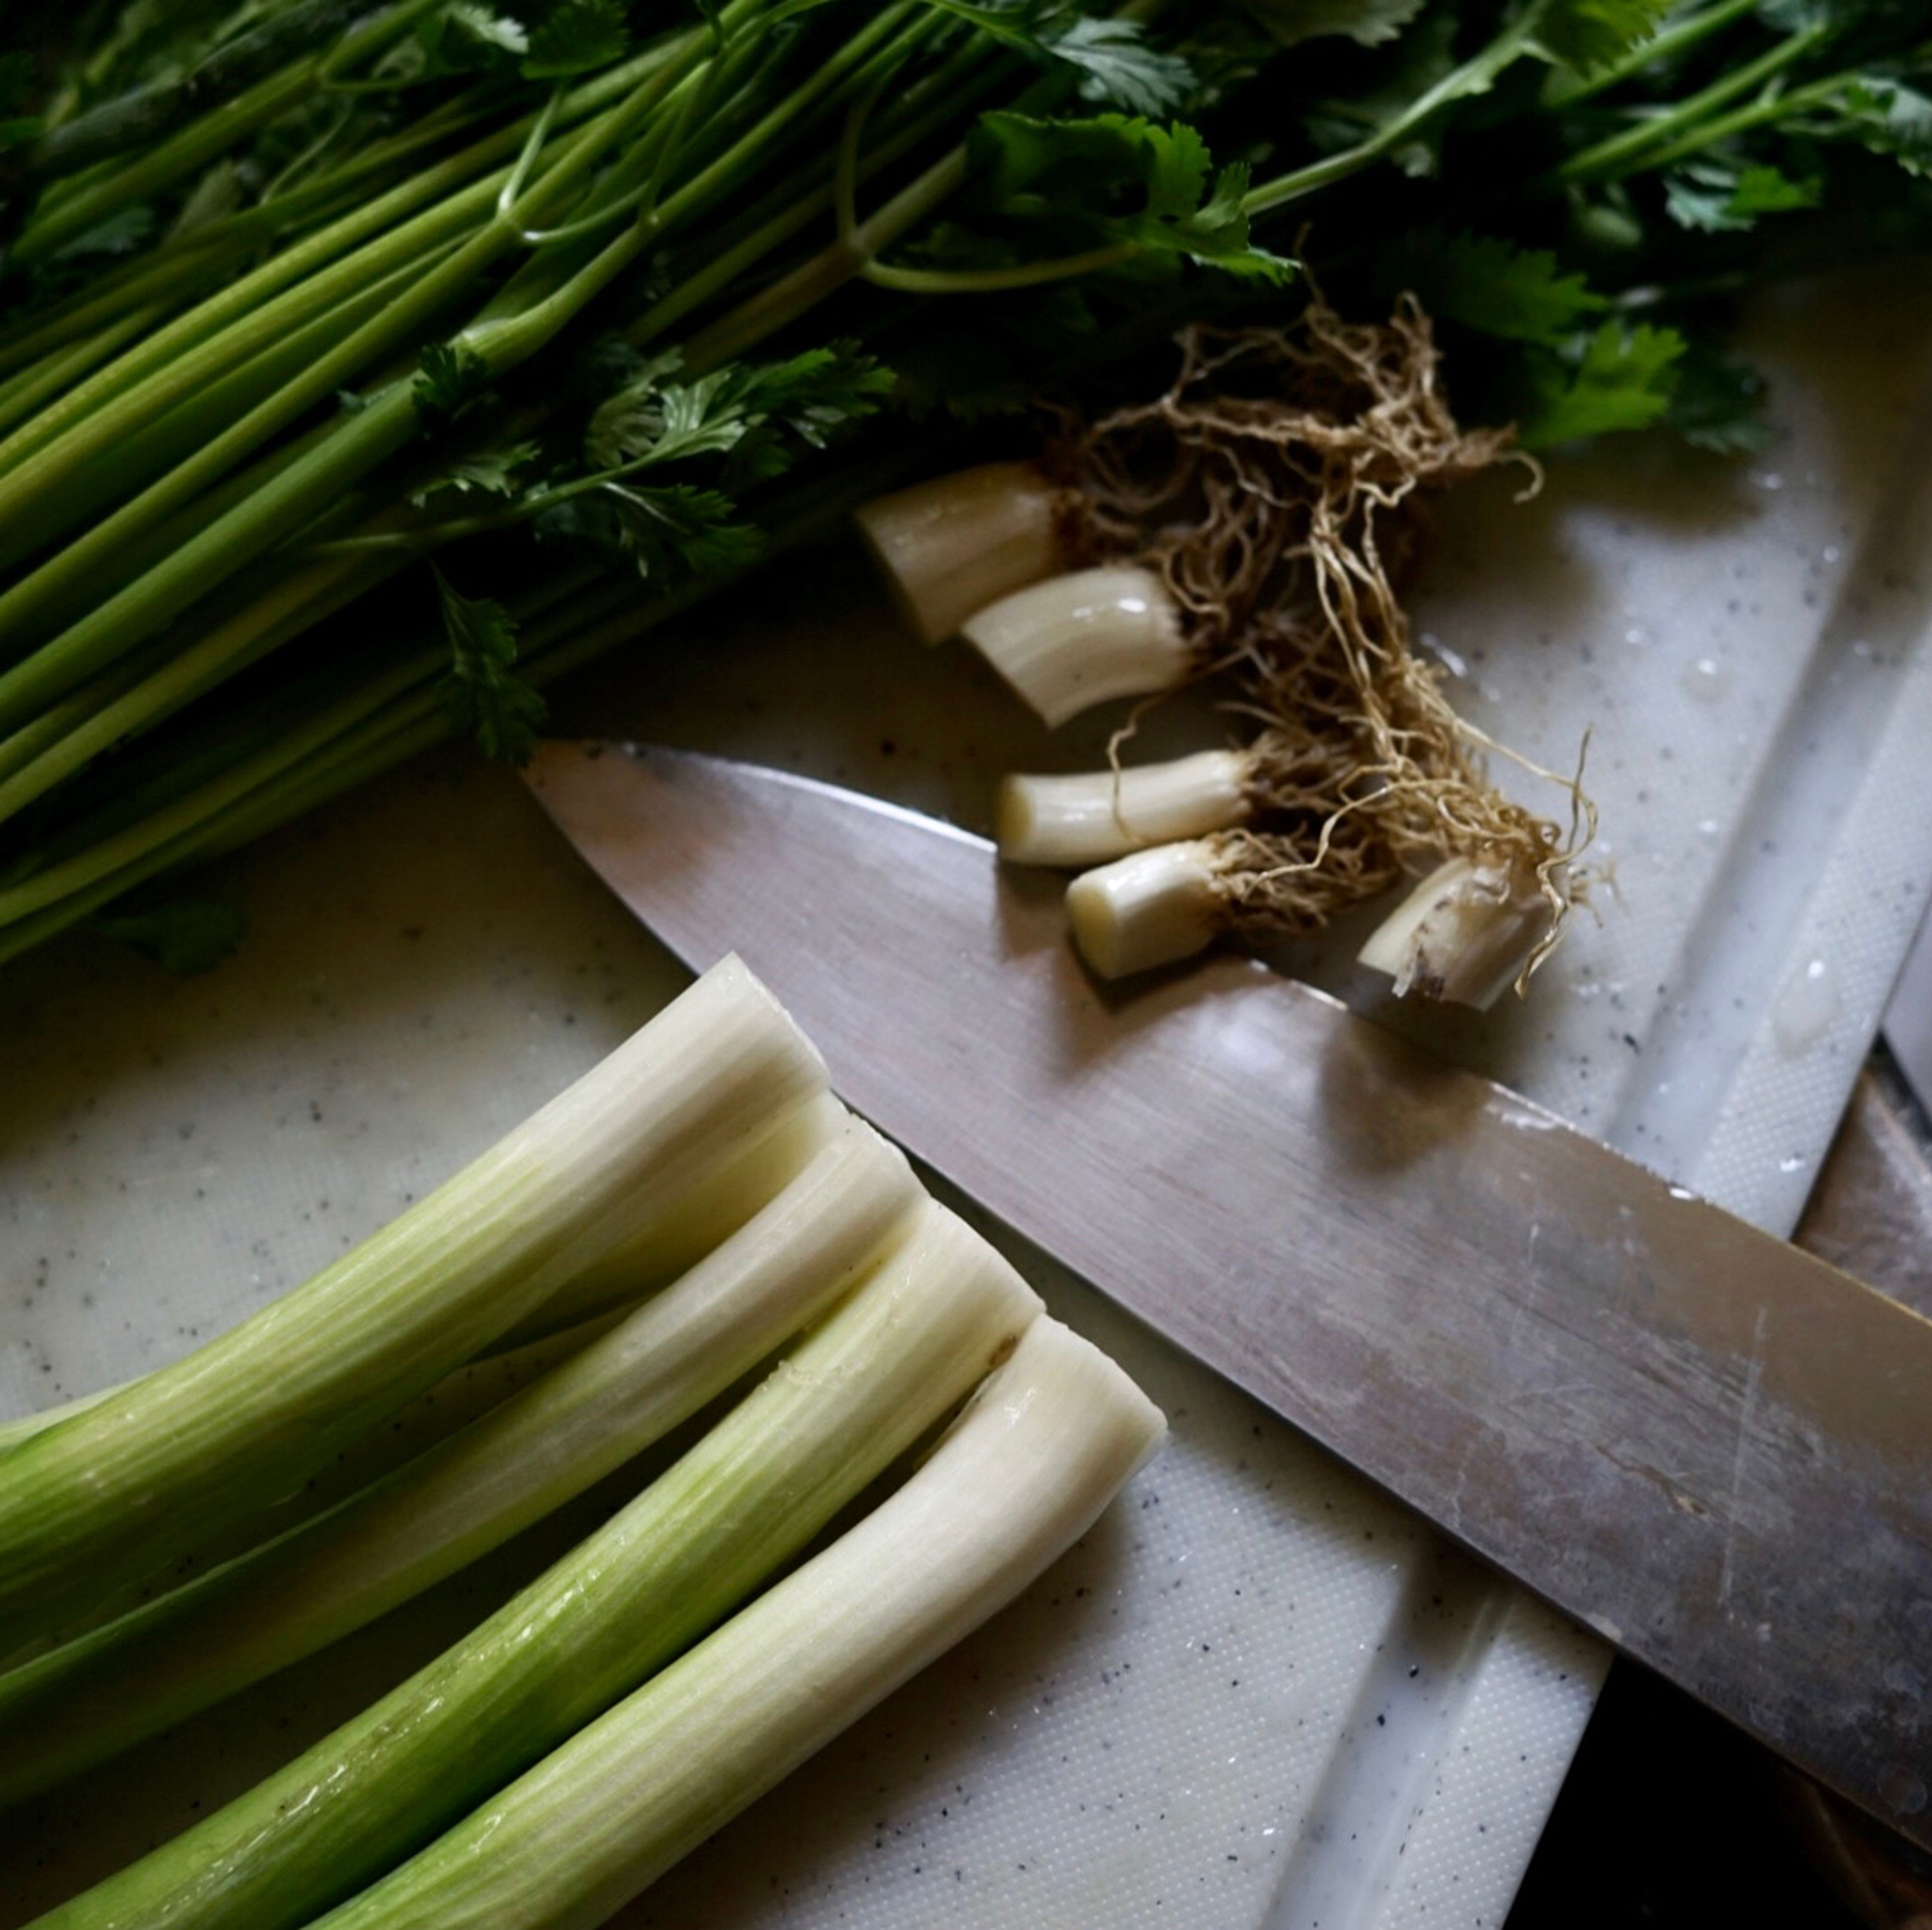 After cleaning the scallions, cut the roots off the scallions, cut them into small pieces.